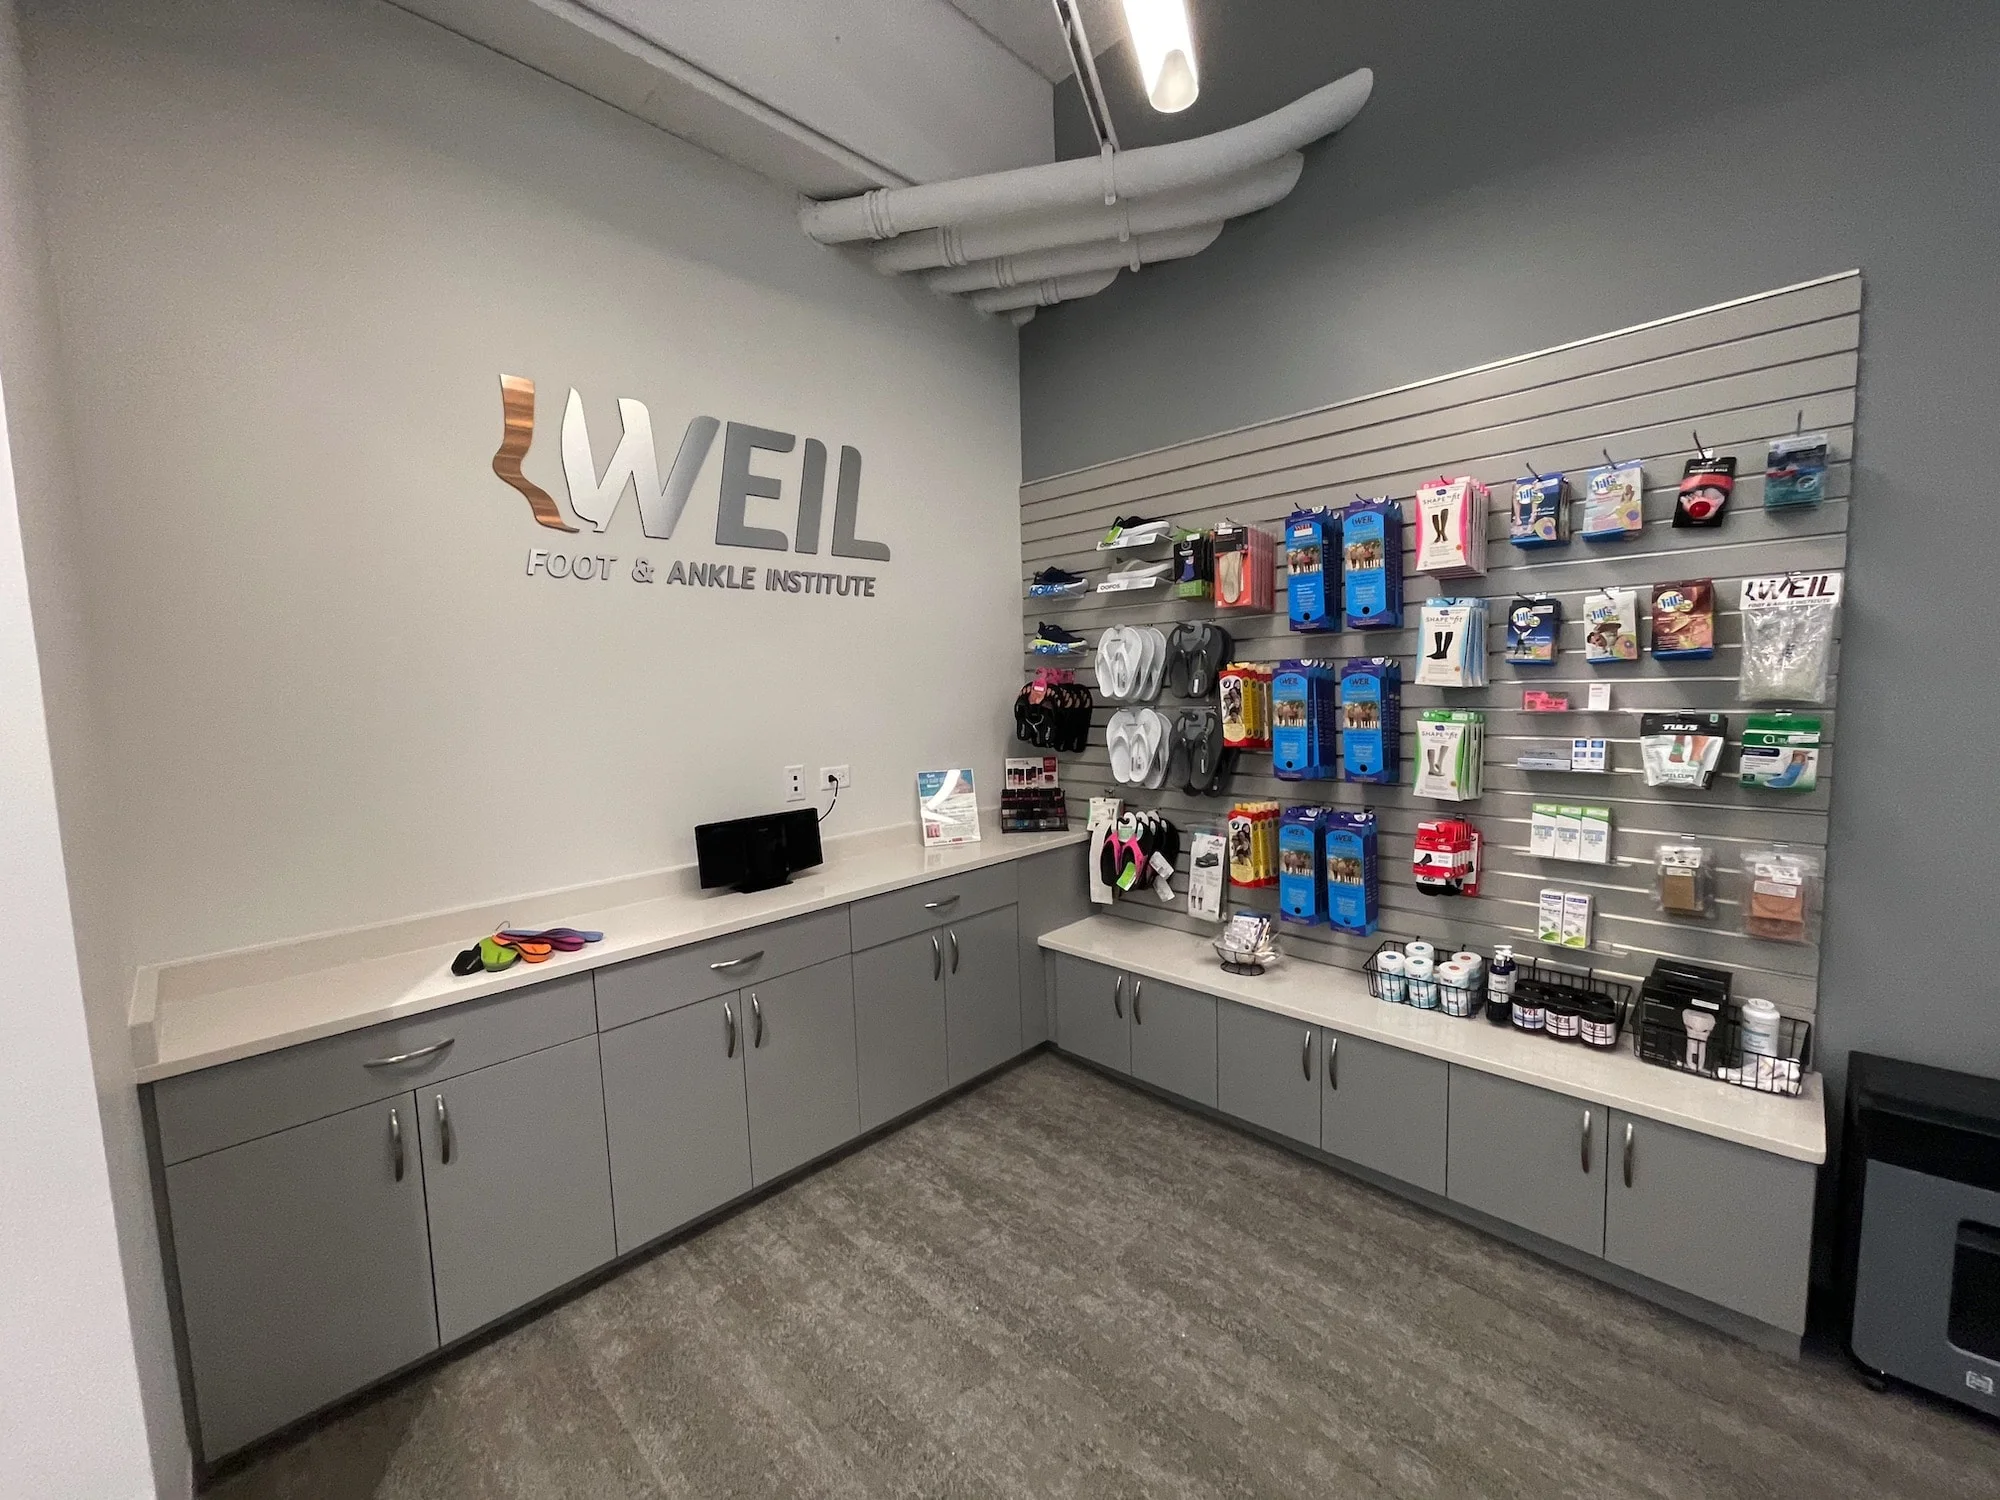 Weil Foot & Ankle Institute - Lincoln Park Store